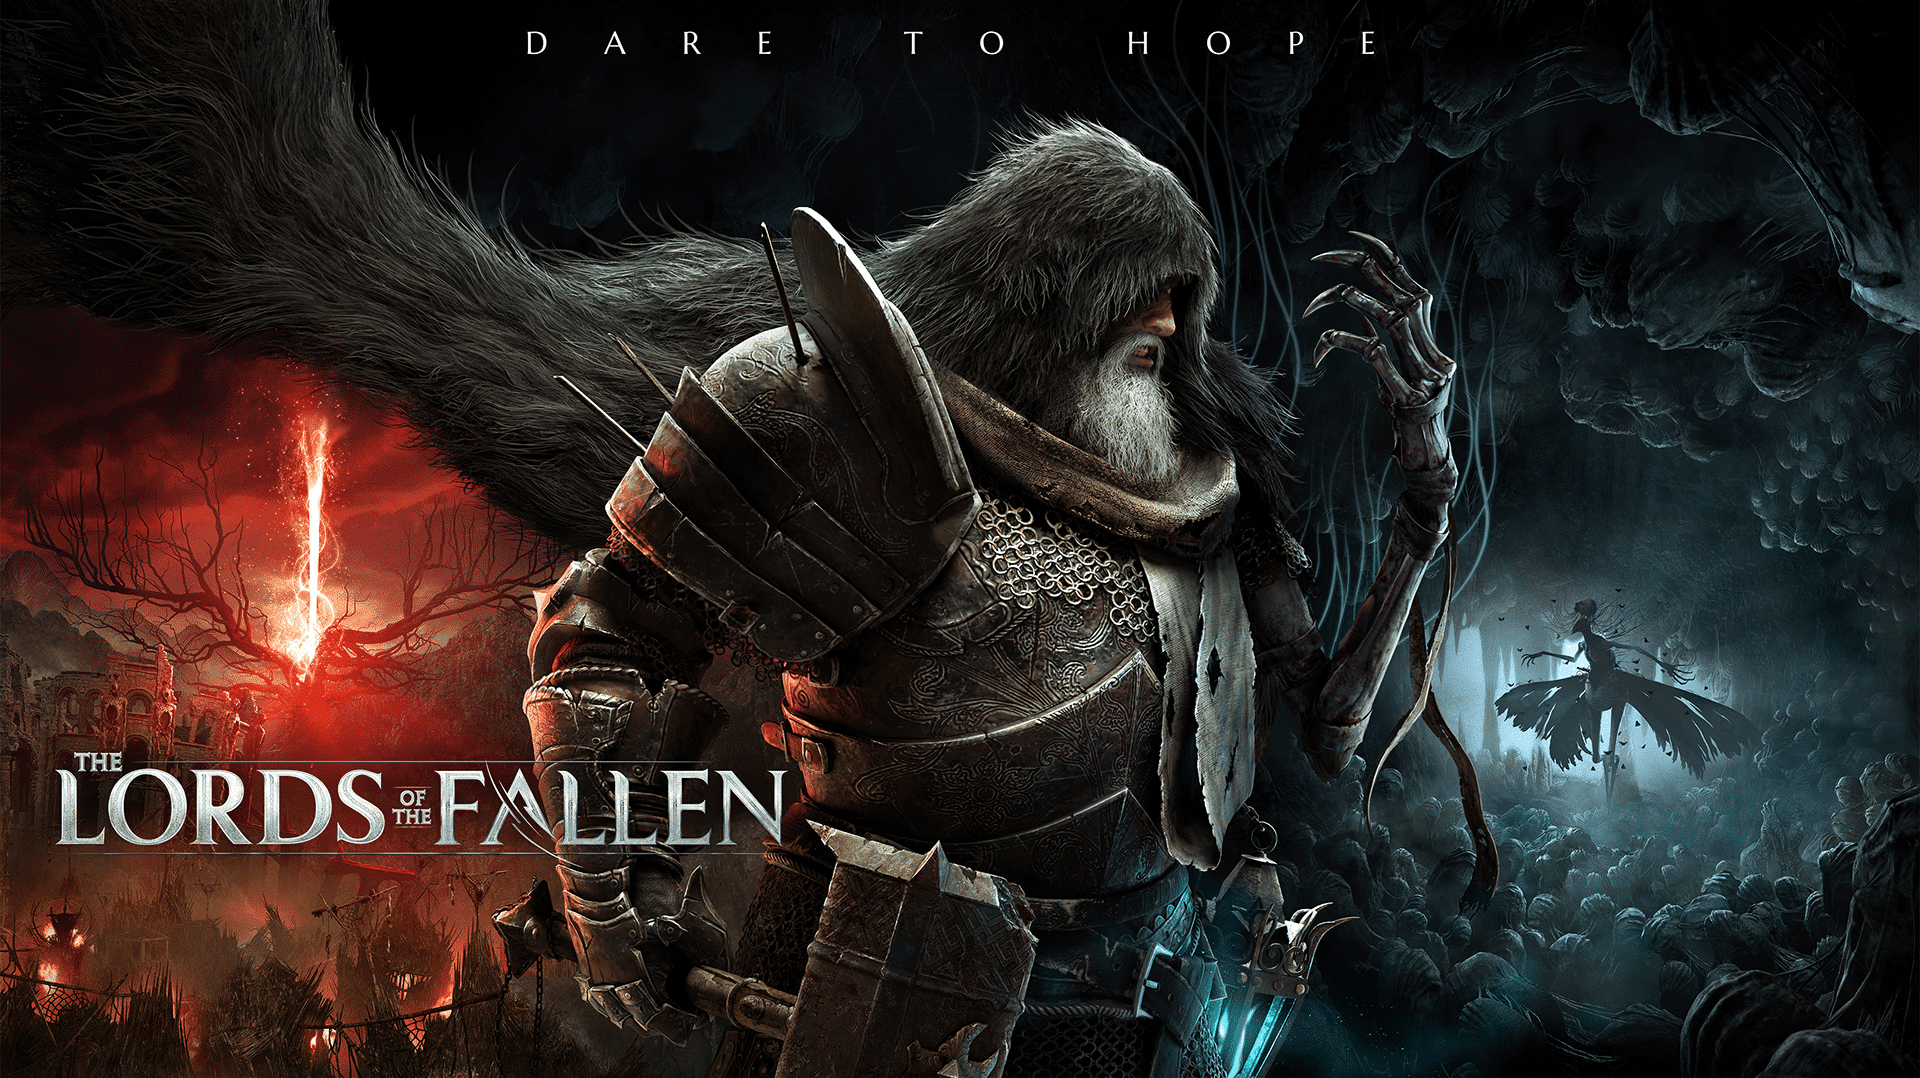 Lords of the Fallen Game of the Year Edition 2014 Steam Key for PC